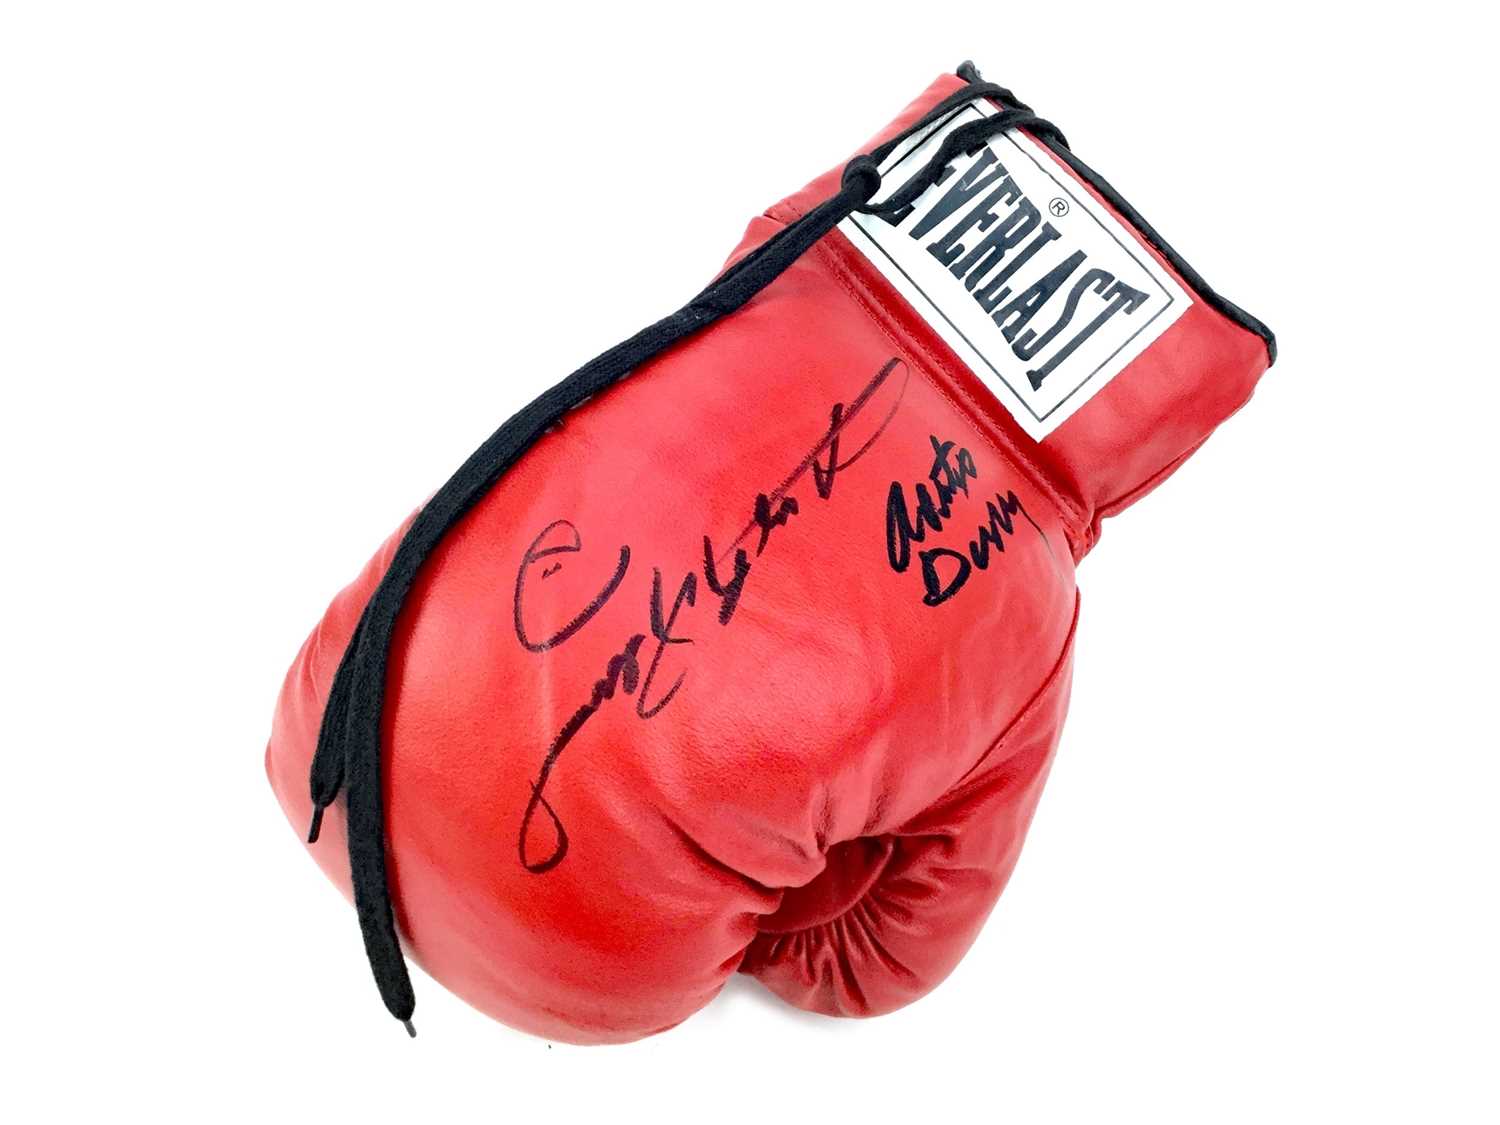 Lot 1750 - AN EVERLAST BOXING GLOVE SIGNED BY ROBERTO DURAN AND SUGAR RAY LEONARD